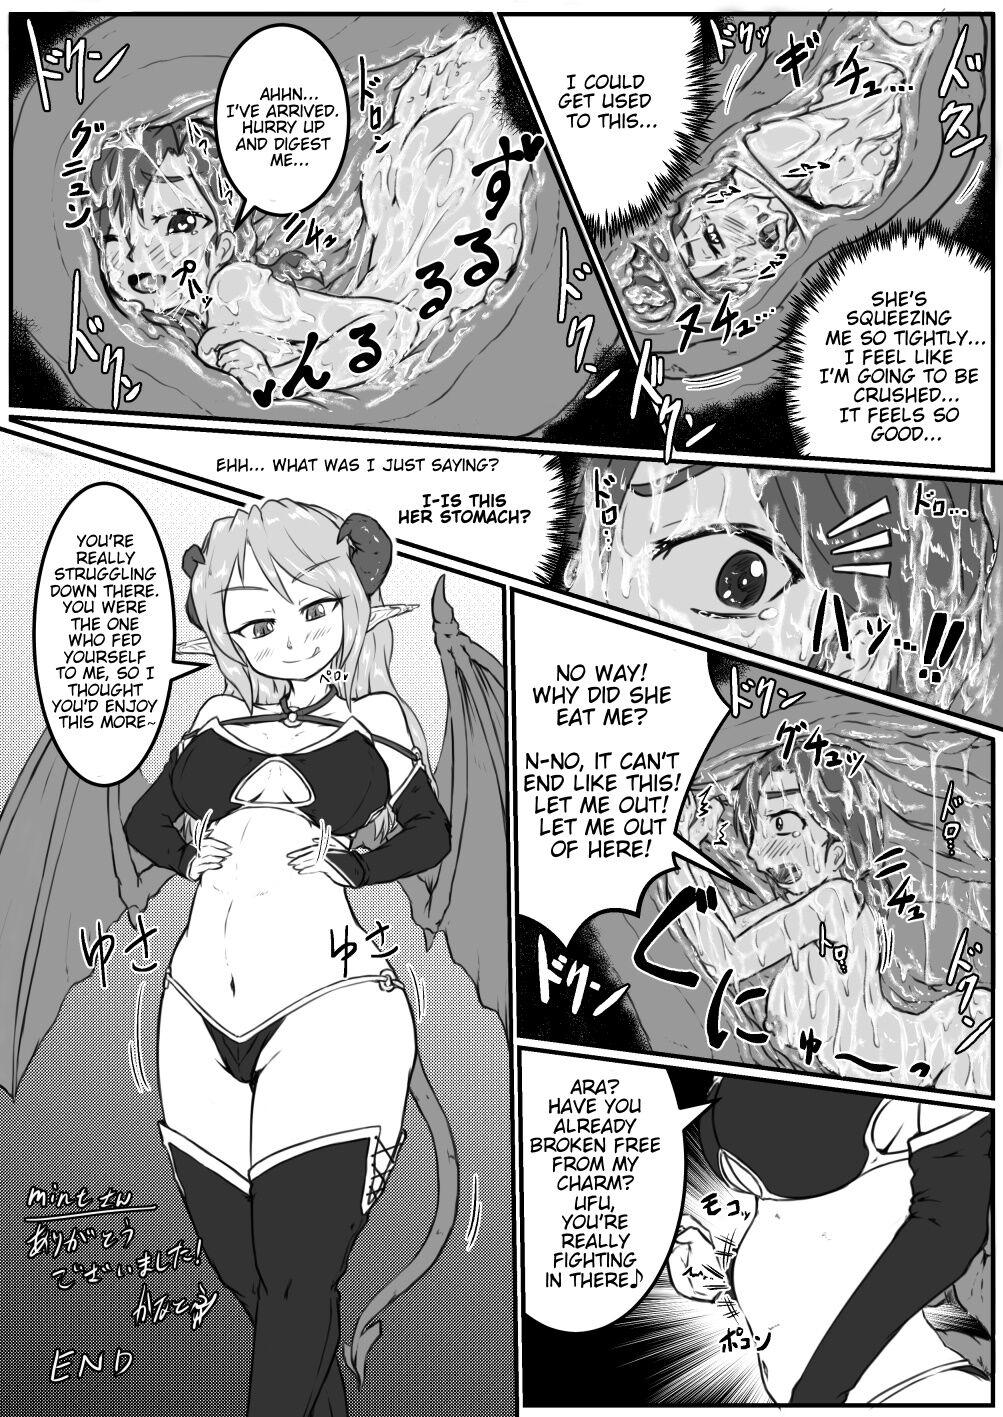 Swallowed by Big Sister Succubus 3